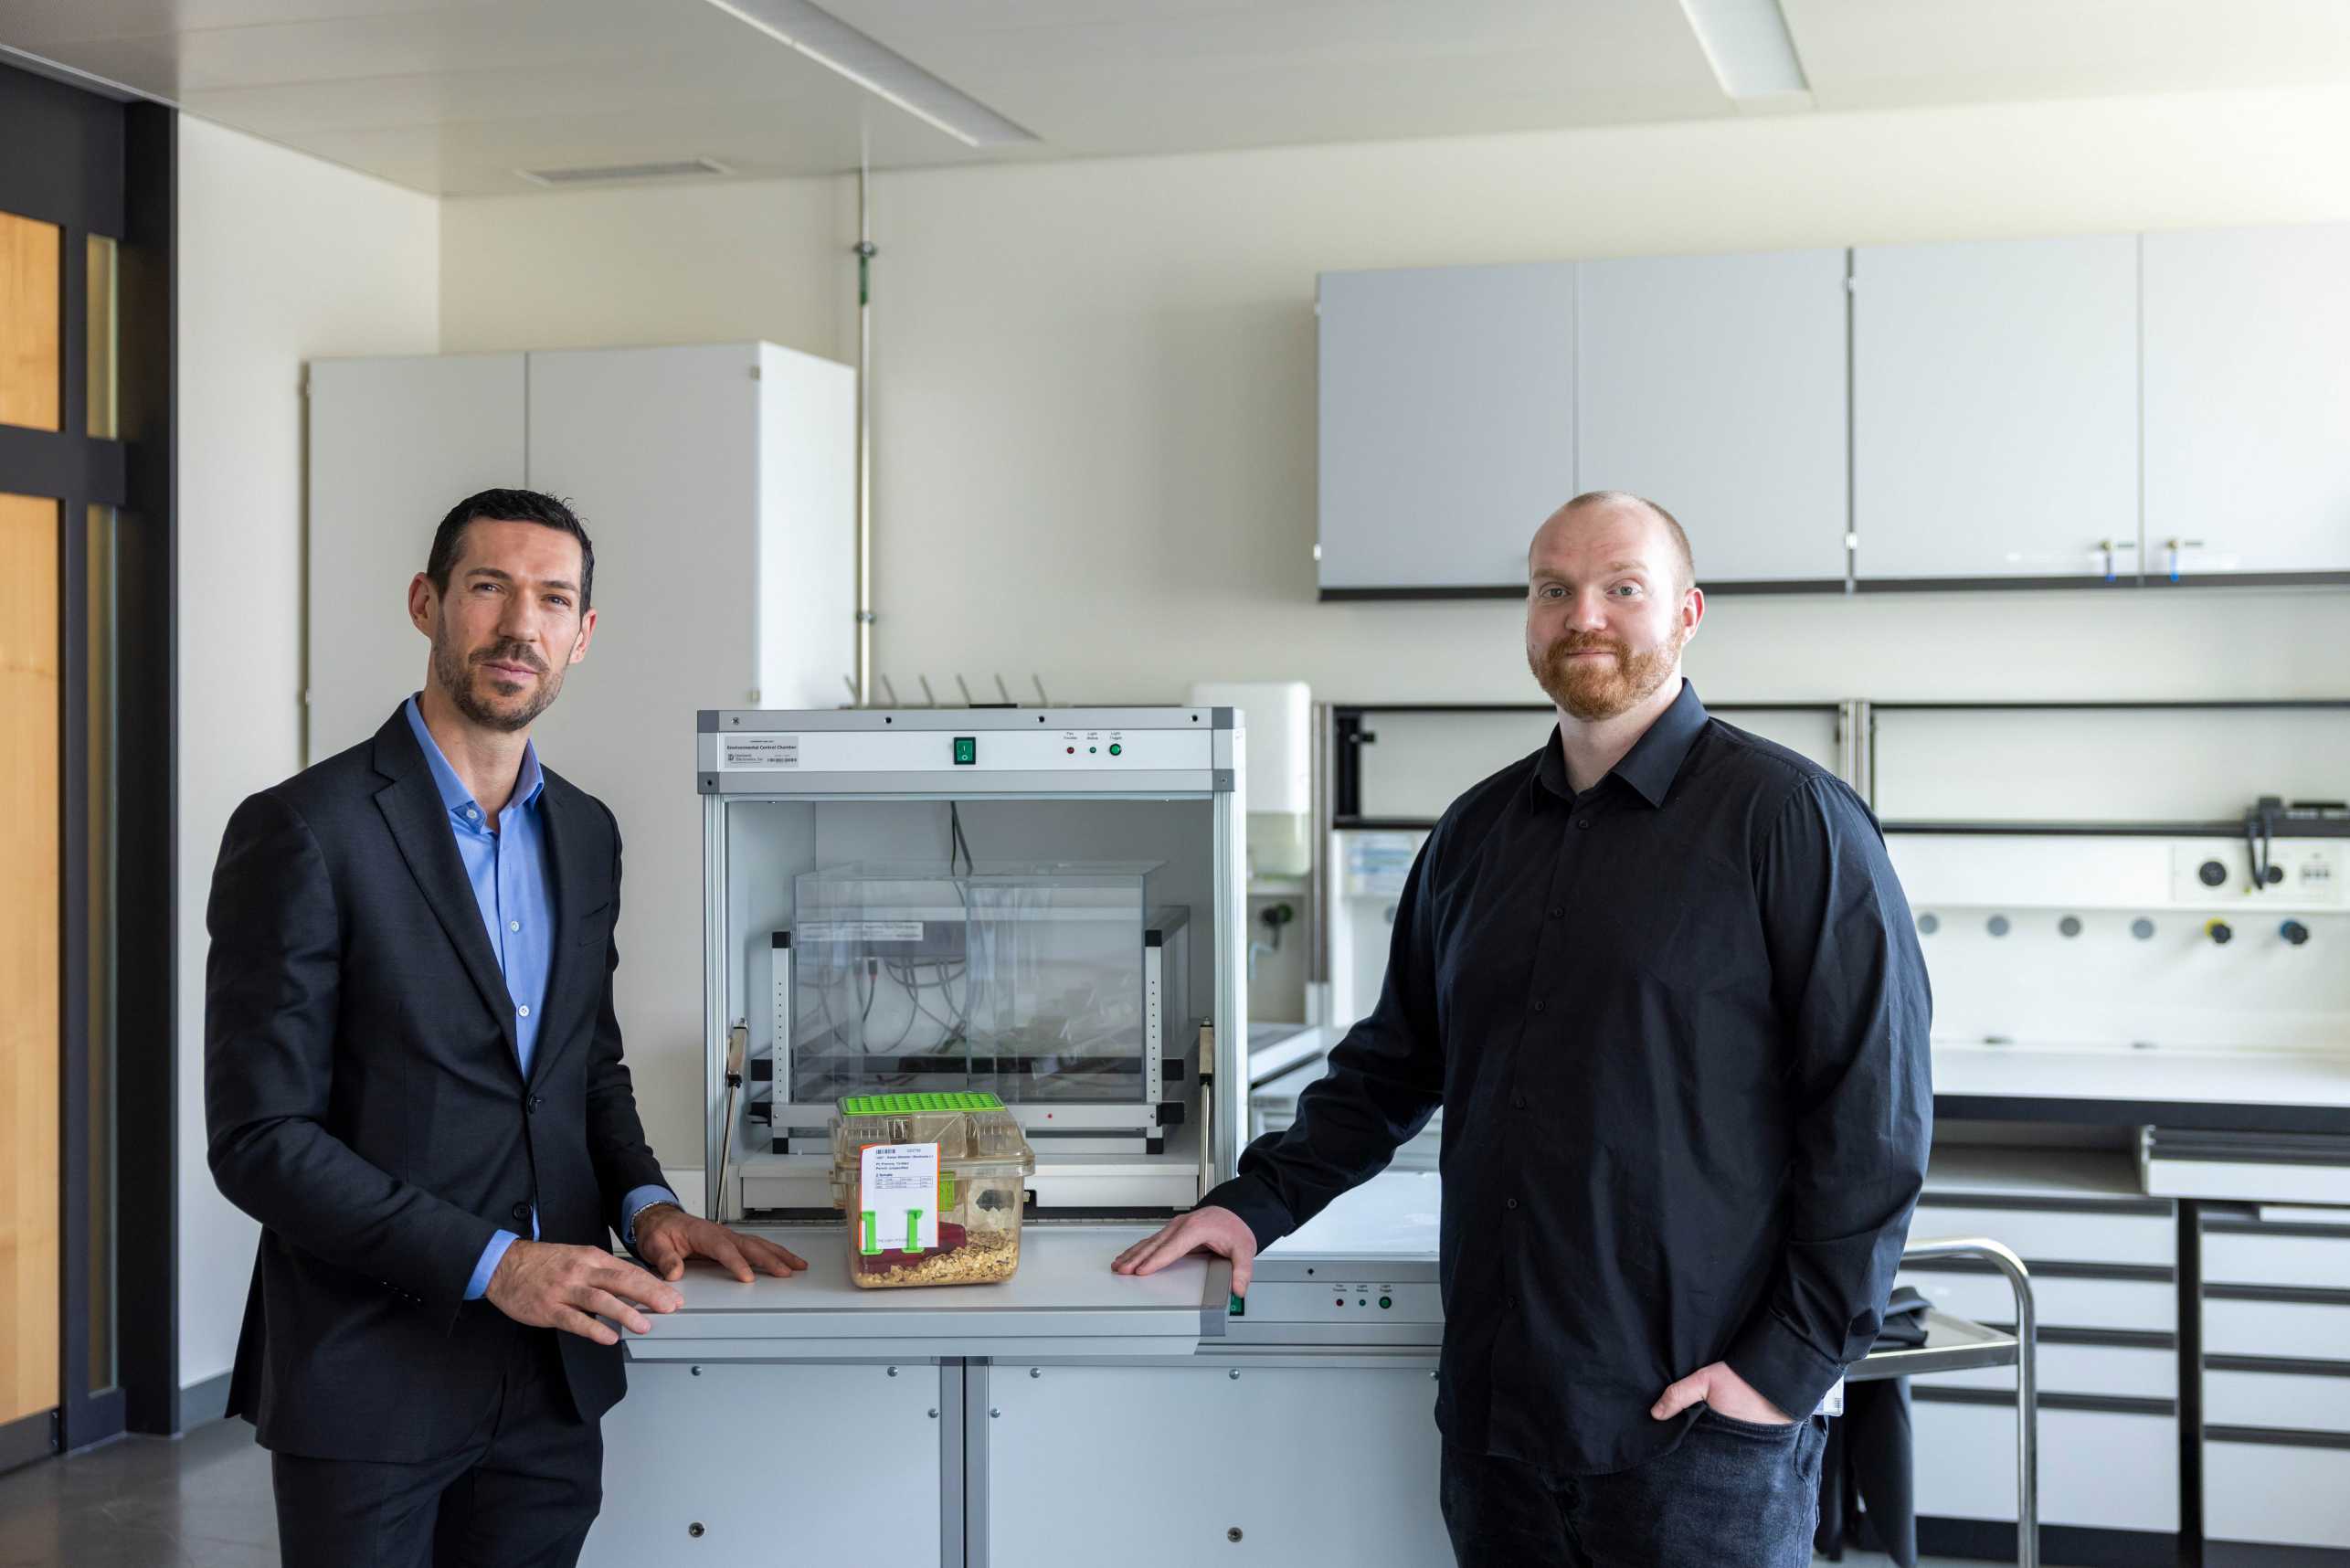 Johannes Bohacek (left) and Oliver Sturman (right) stand in the lab